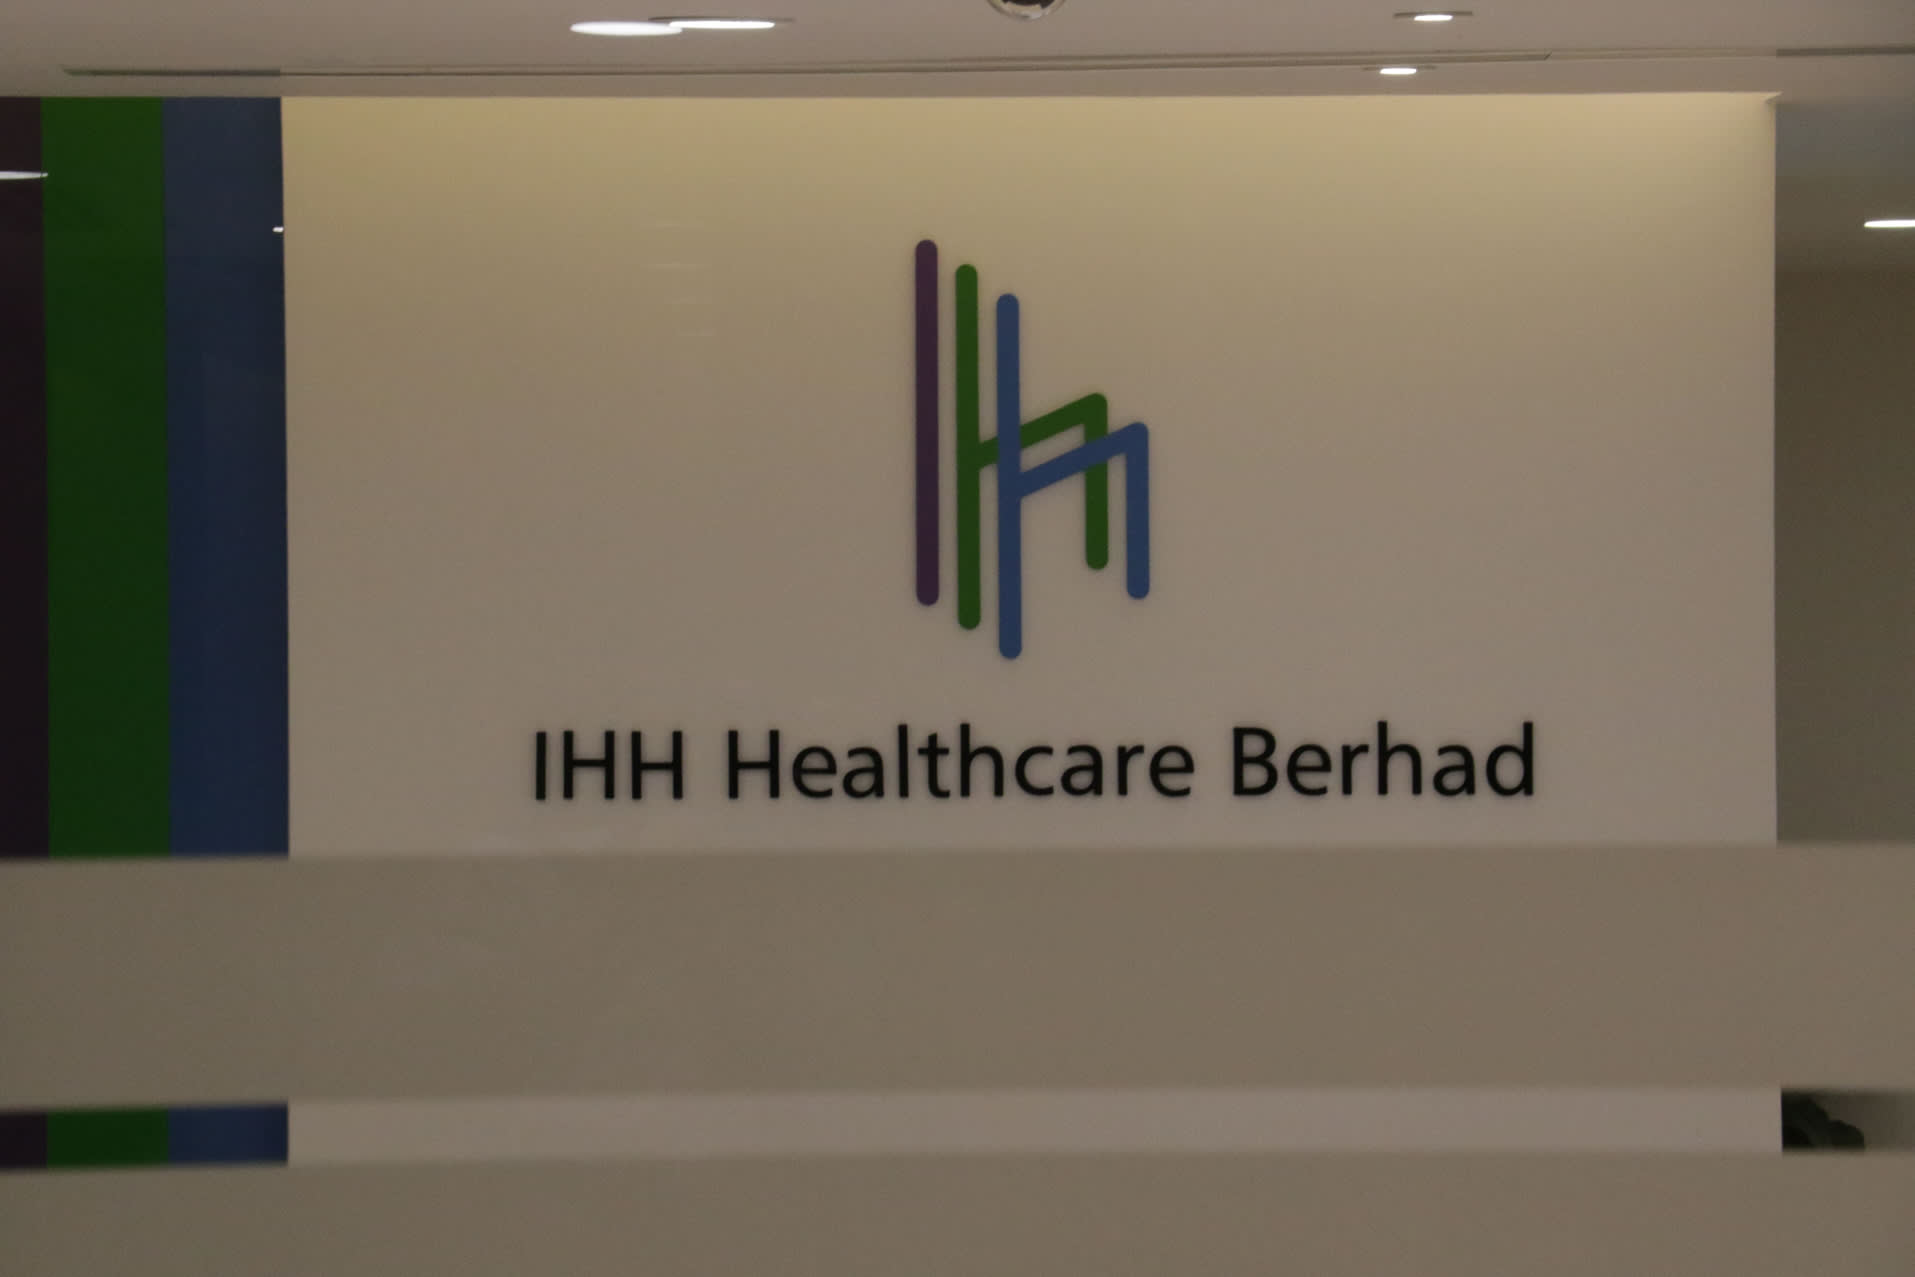 IHH acquires controlling 31.1% stake in Fortis for Rs 4,000 crore